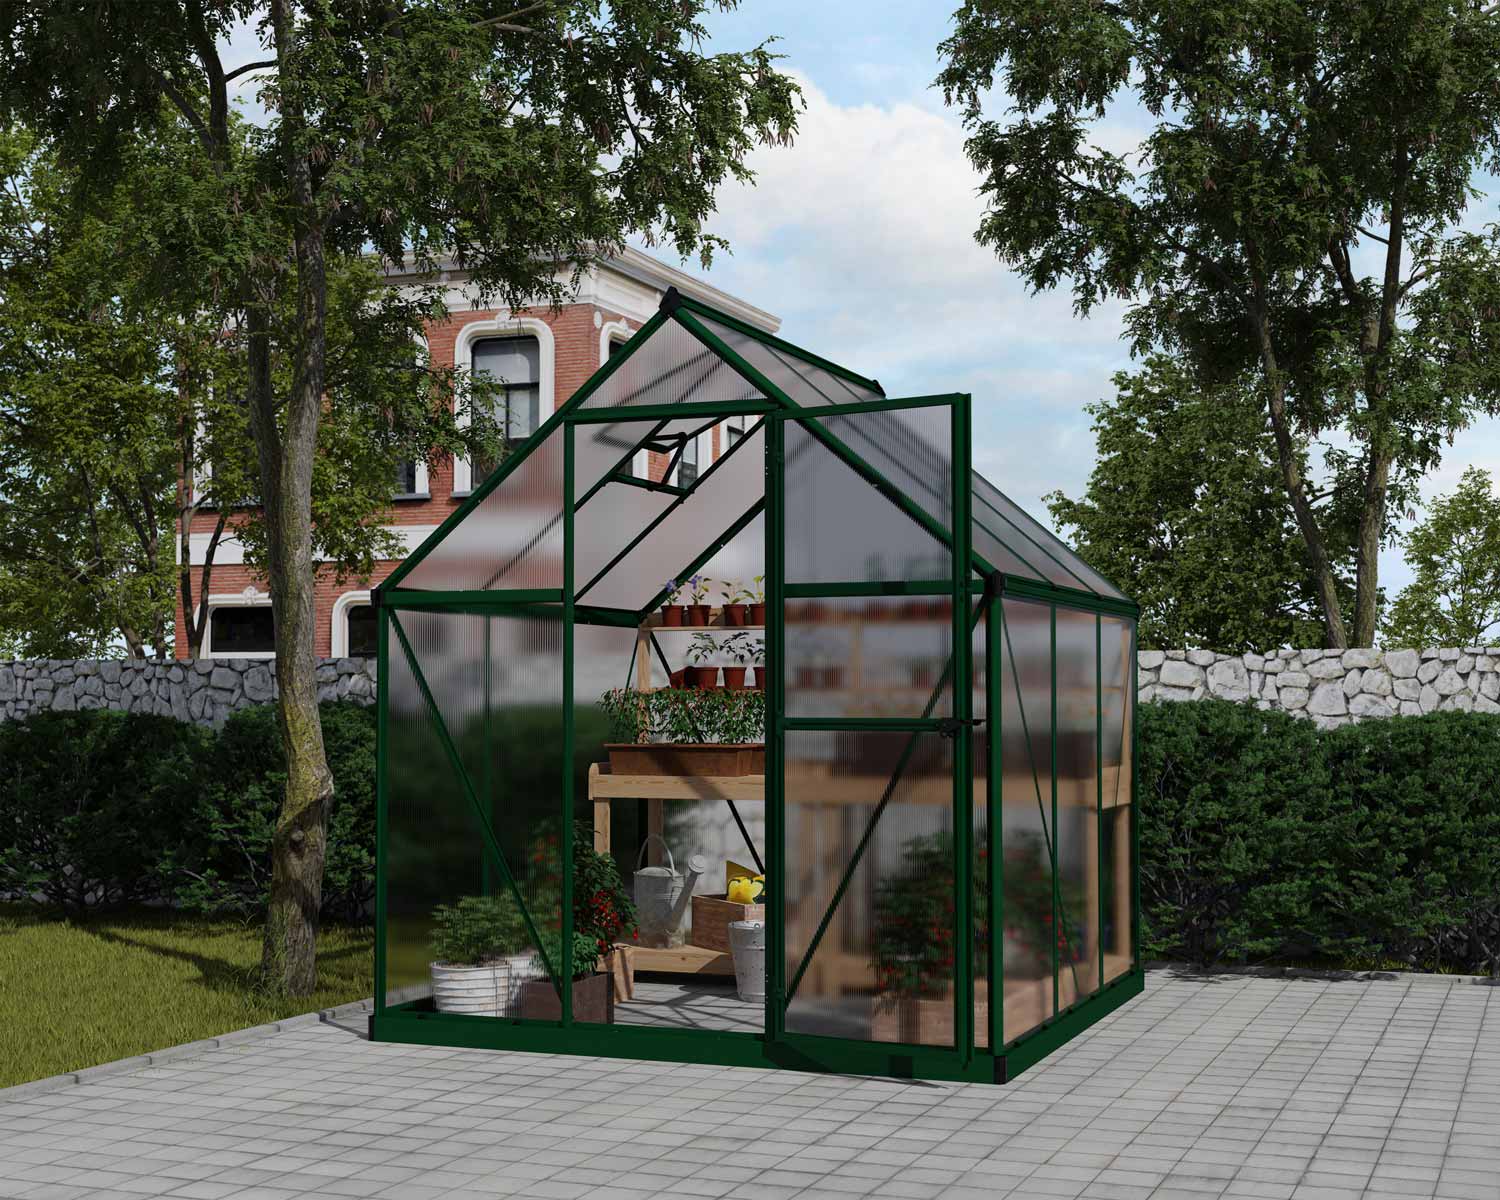 Mythos 6 ft. x 6 ft. Greenhouse Green Structure &amp; Twinwall Panels outside on a lawn